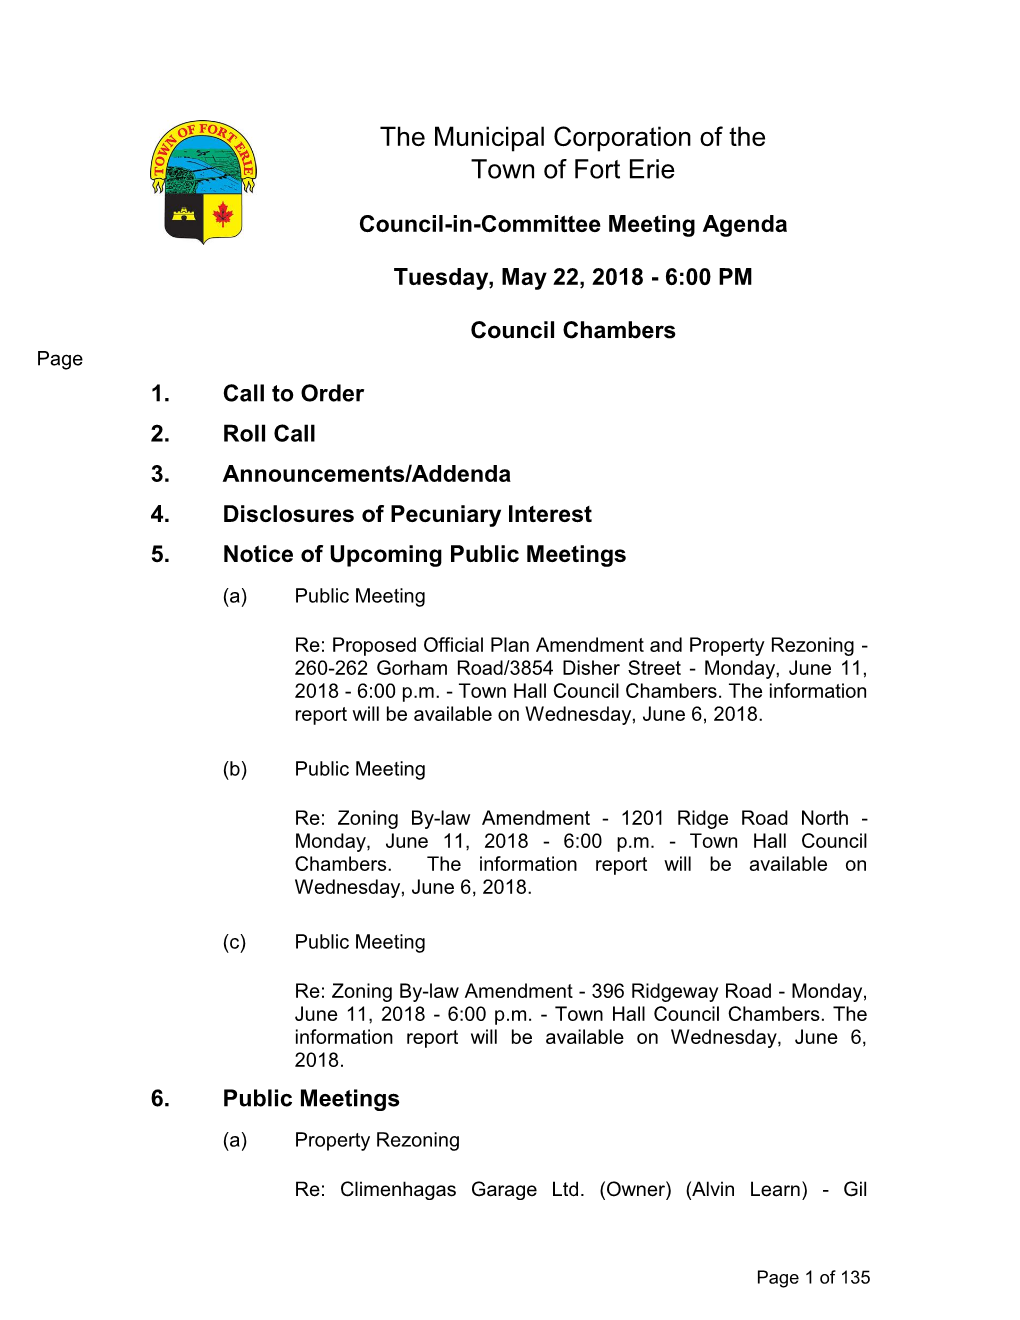 Council-In-Committee Meeting Agenda